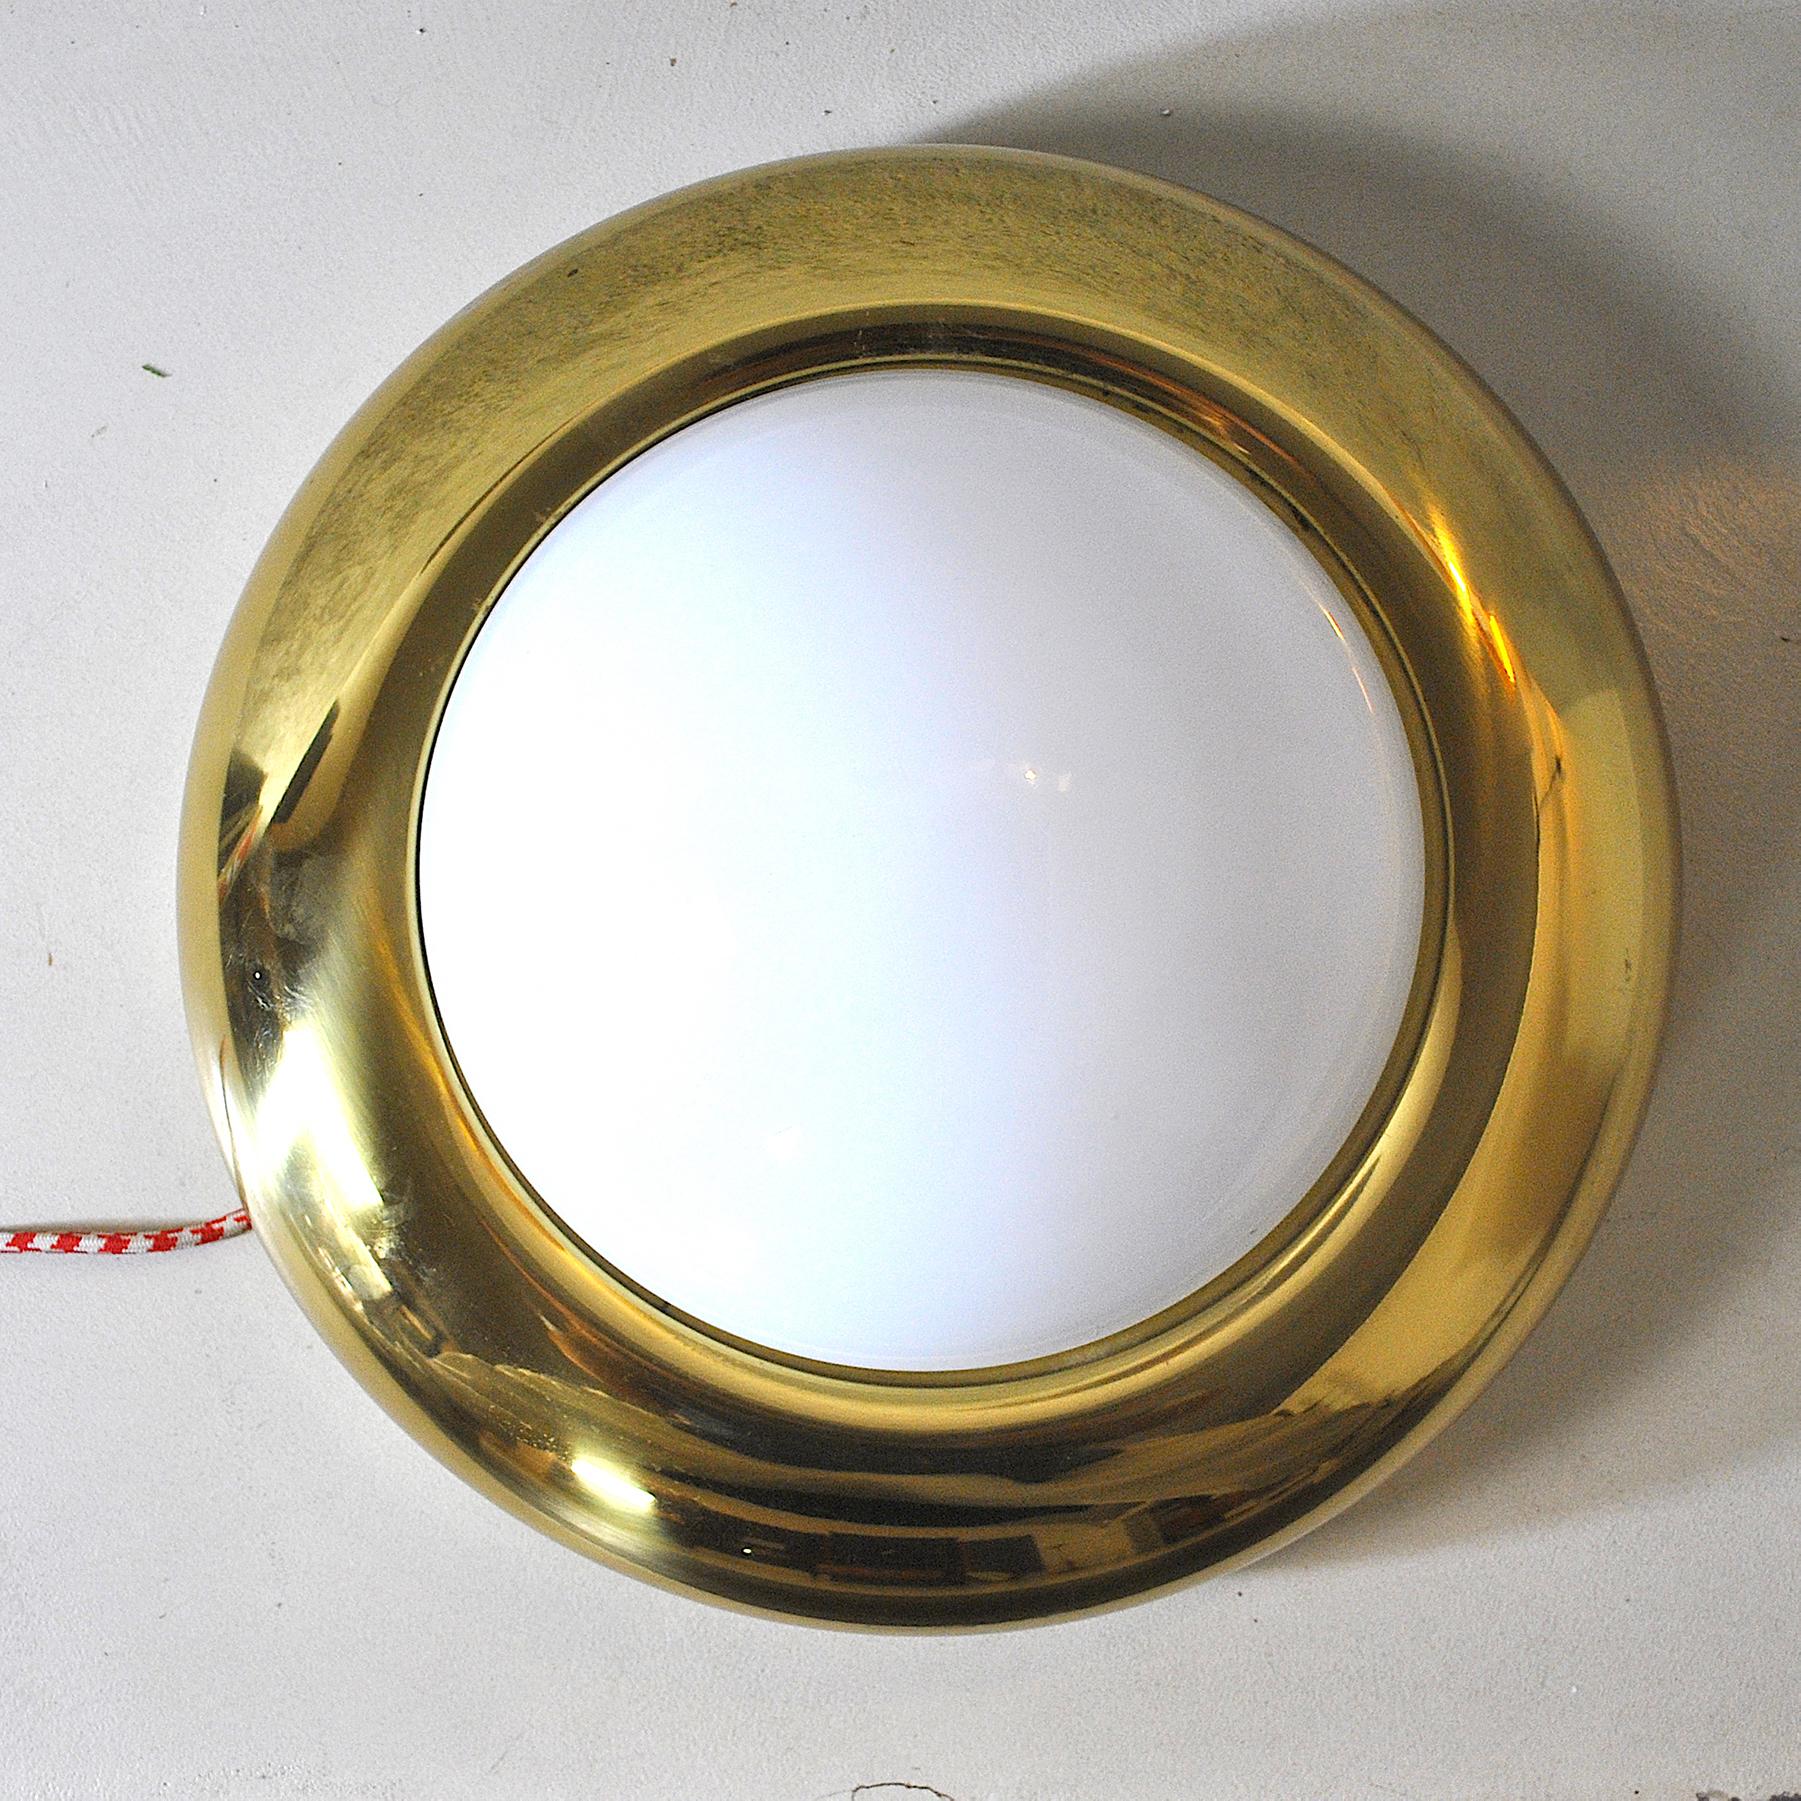 Circular wall light in brass and opaline by Valenti Luce Italian midcentury.